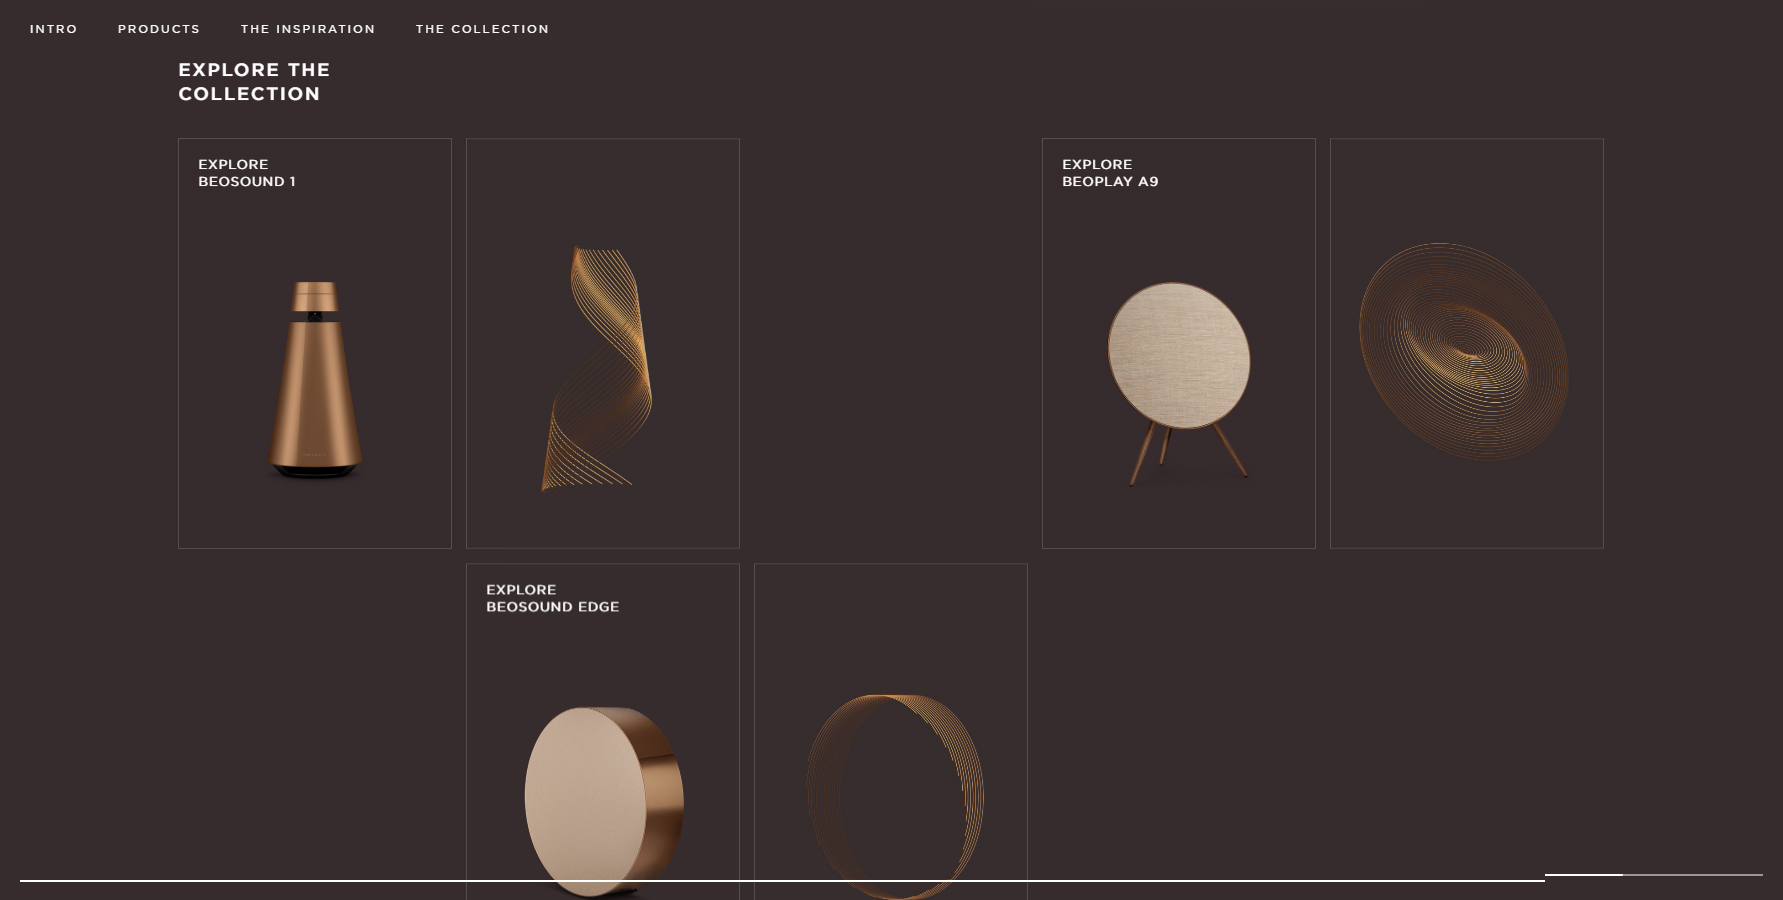 The Bronze Collection by B&O - Website of the Day